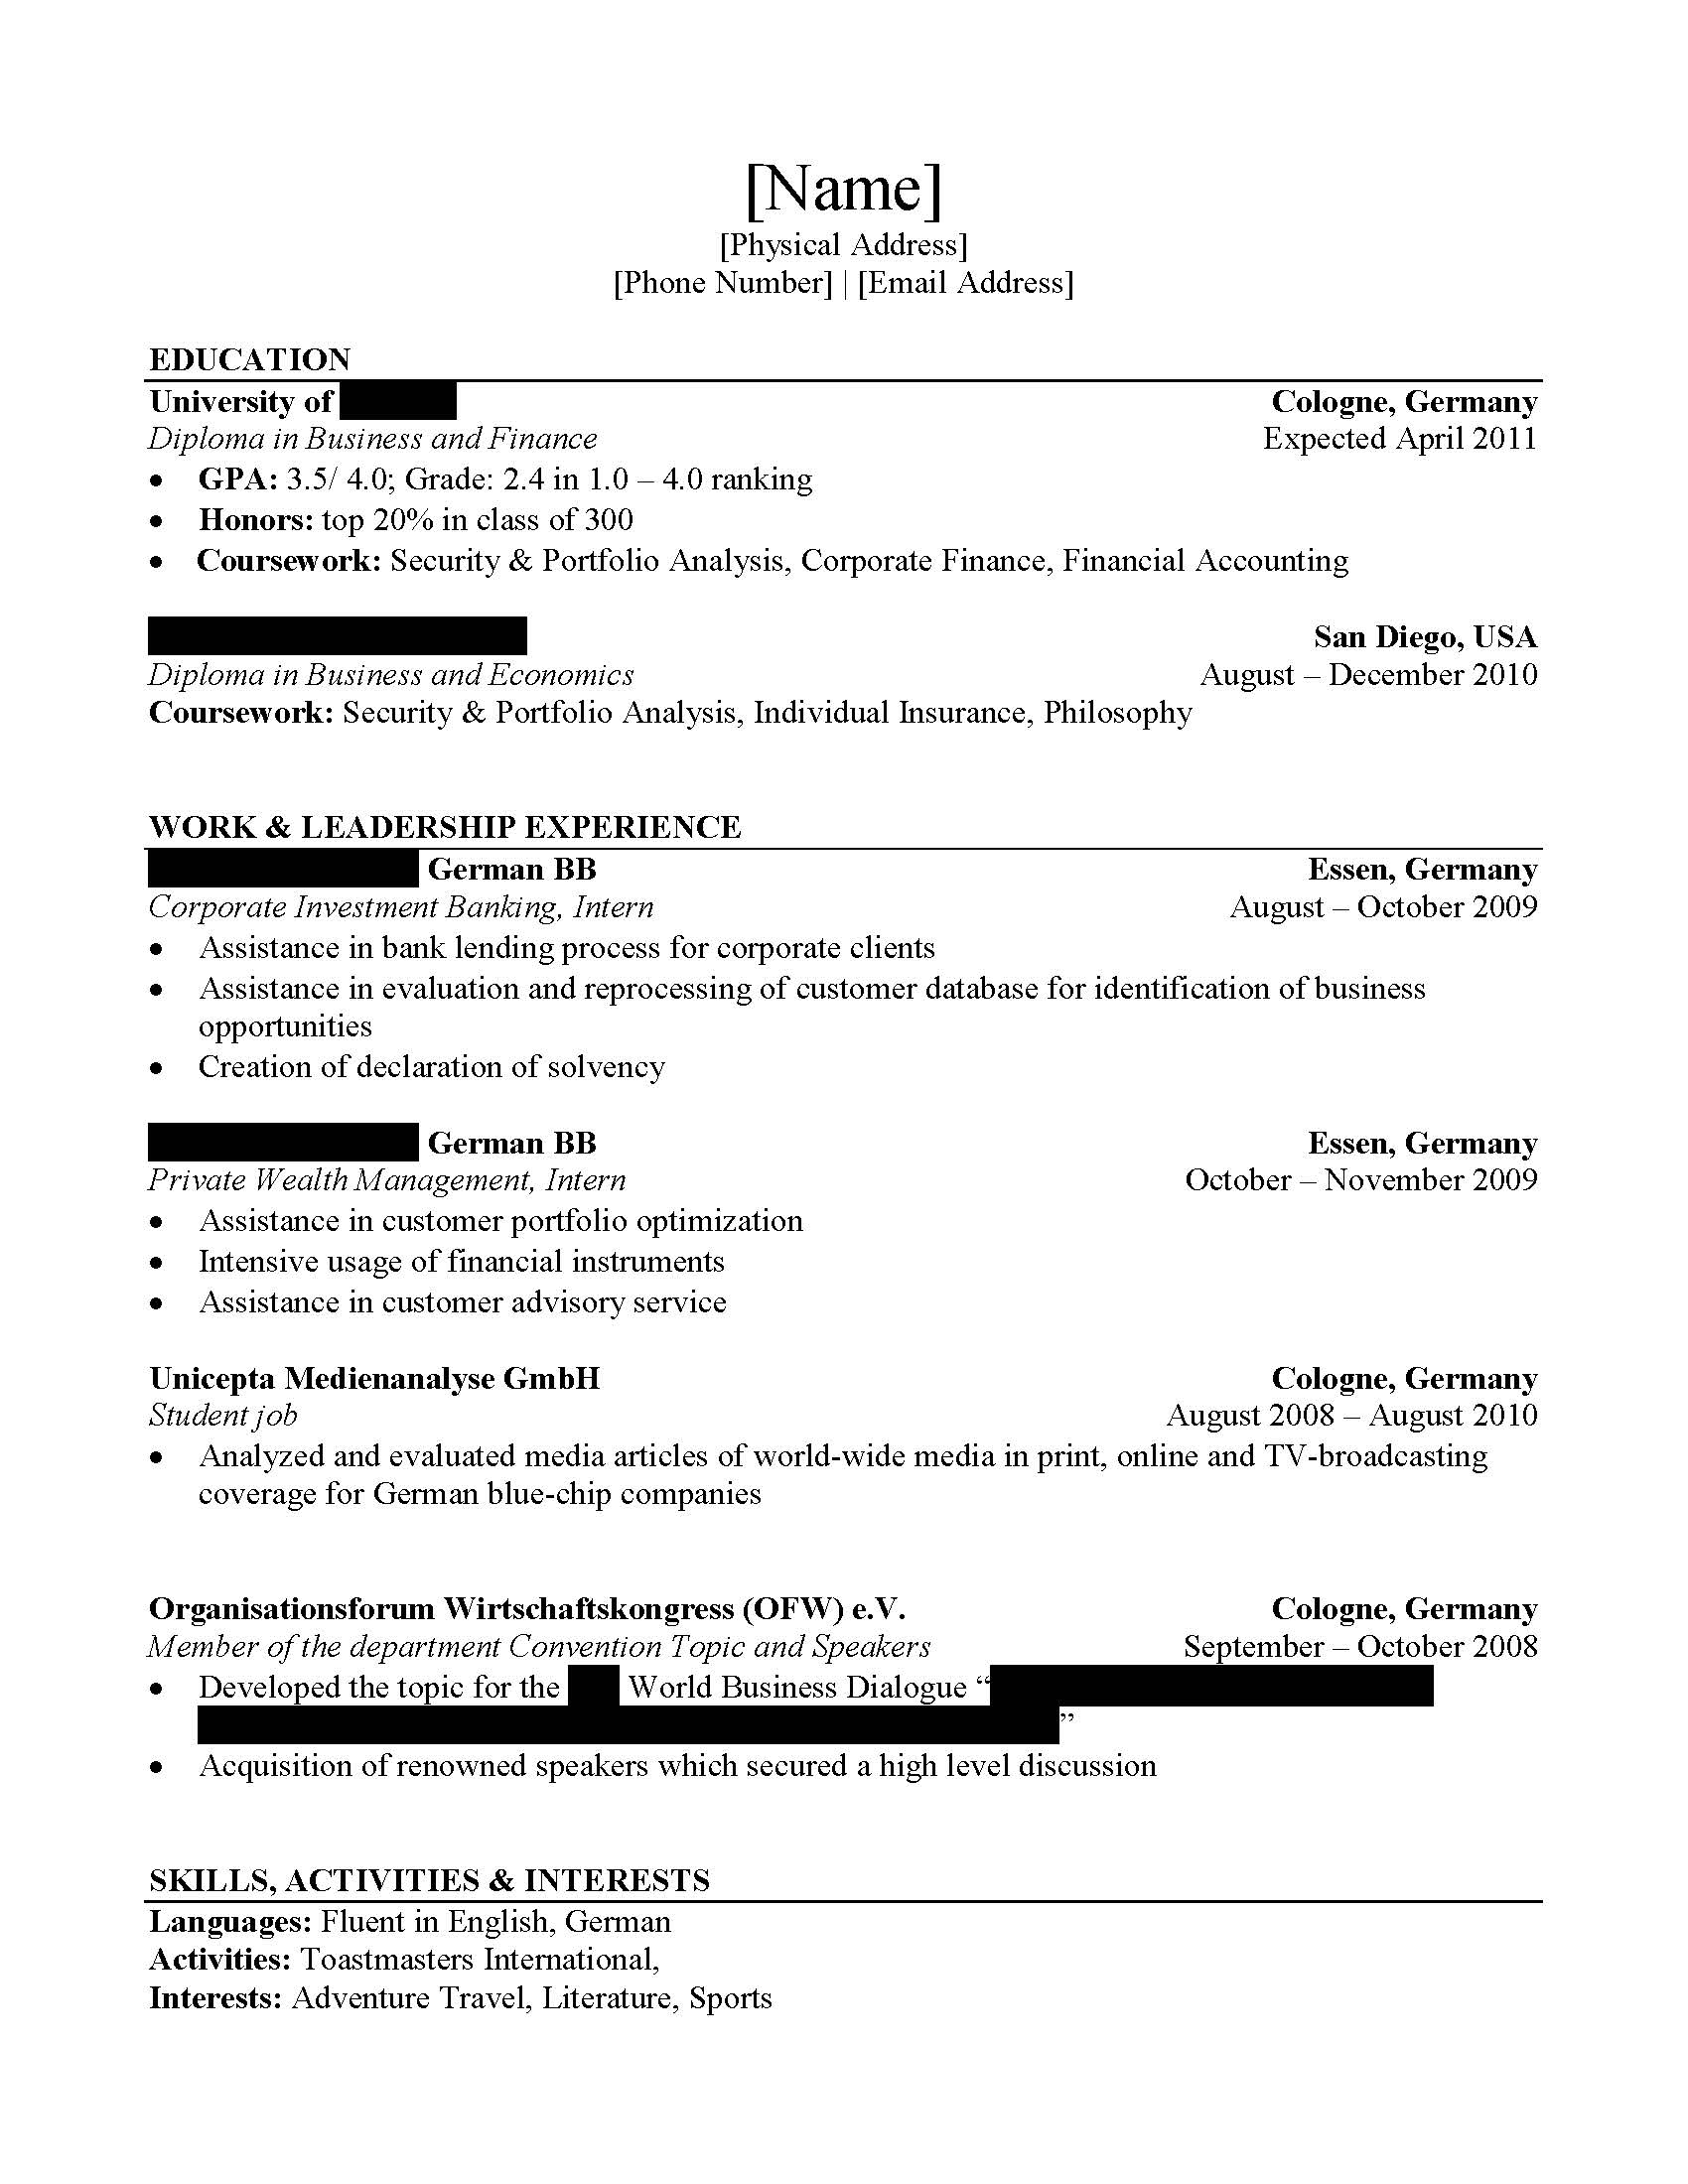 review my resume plz    cv for finance industry singapore f